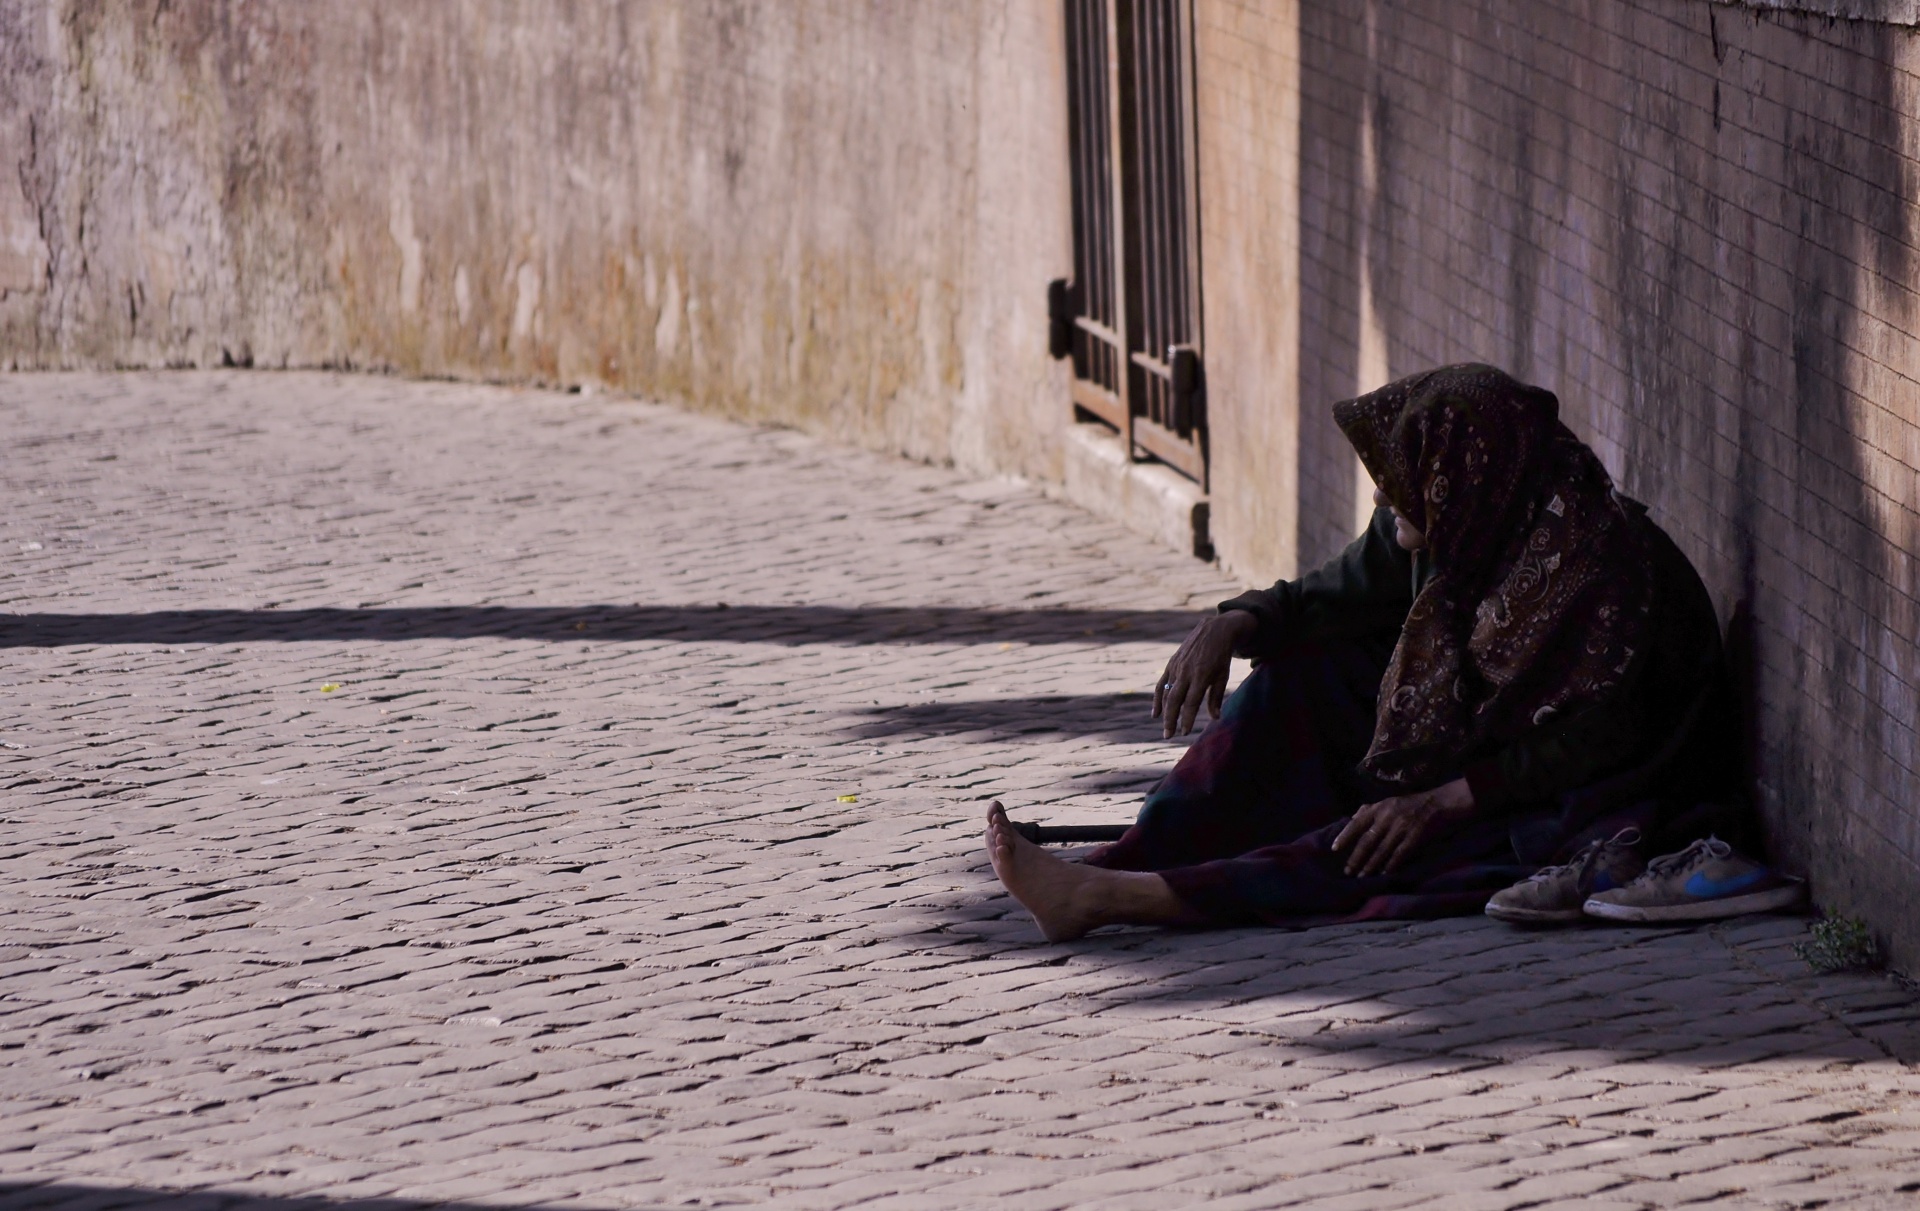 Begging woman in the streets